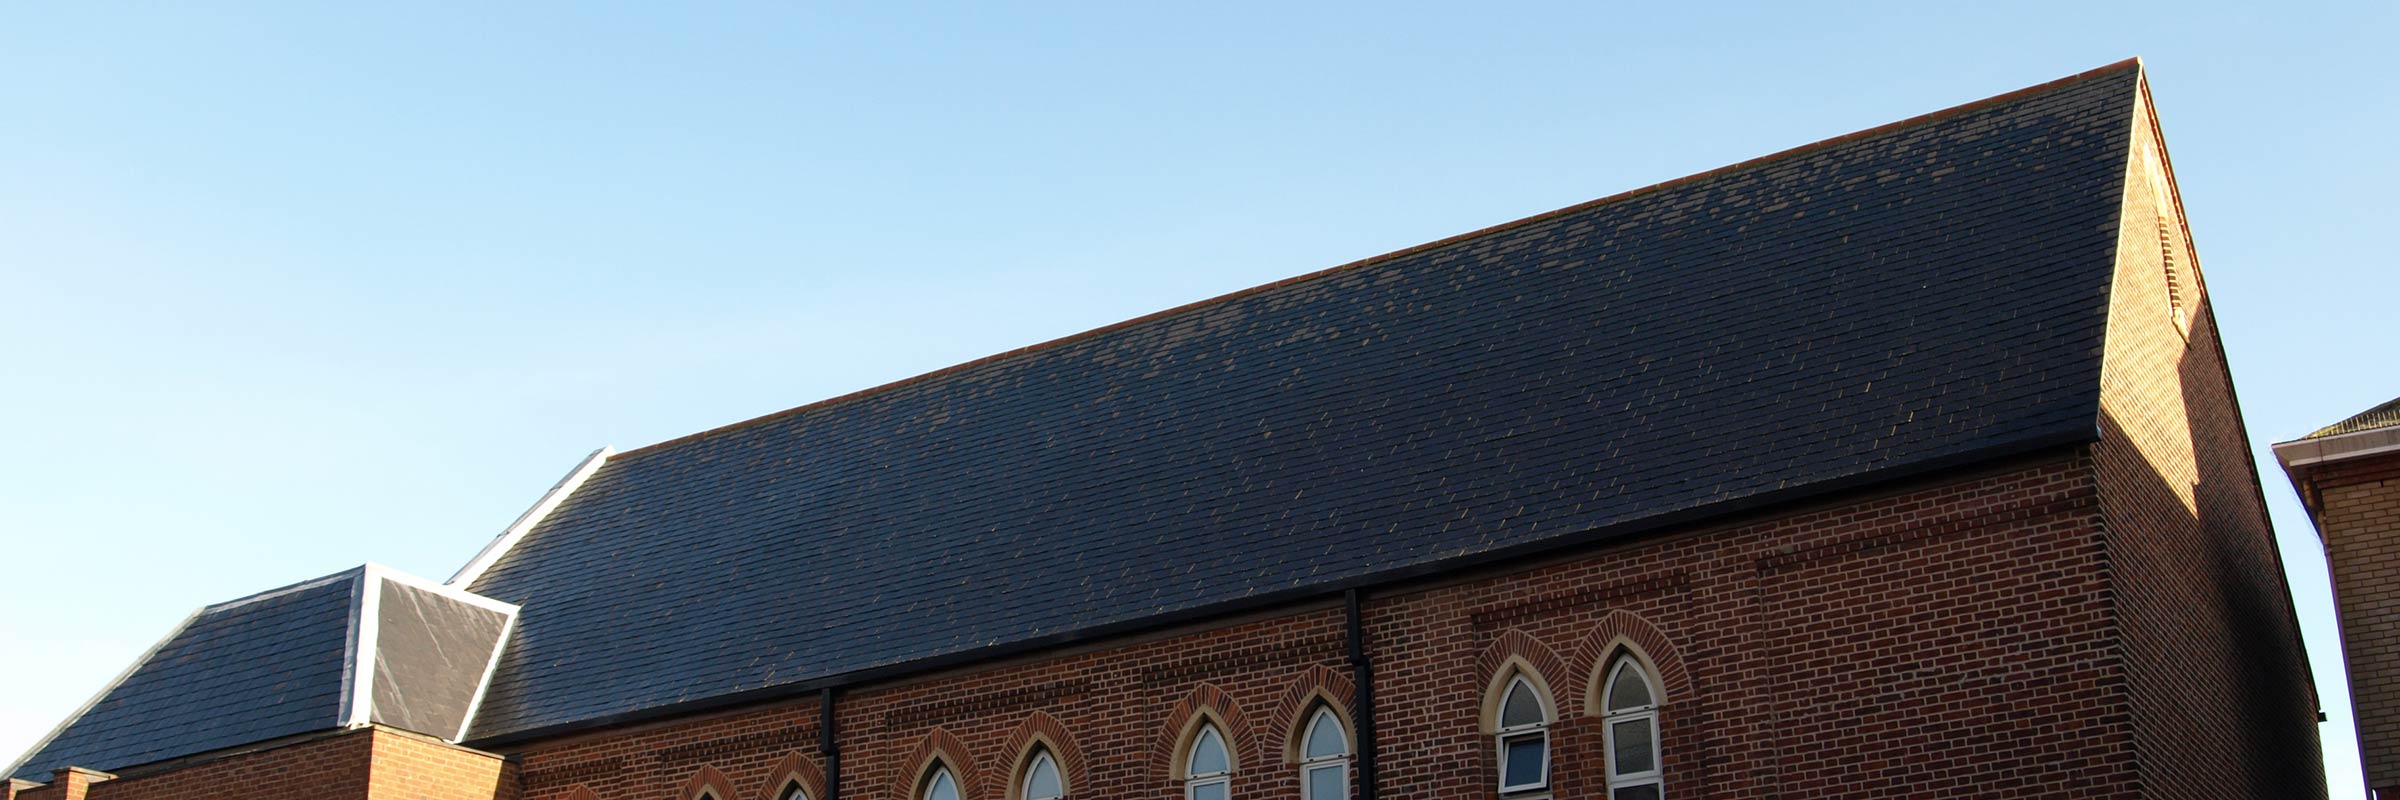 Paul Nunn Roofing Ltd-Residential-Commercial-Roofing Contractor-Bury St Edmunds-Ipswich-Newmarket-Cambridge